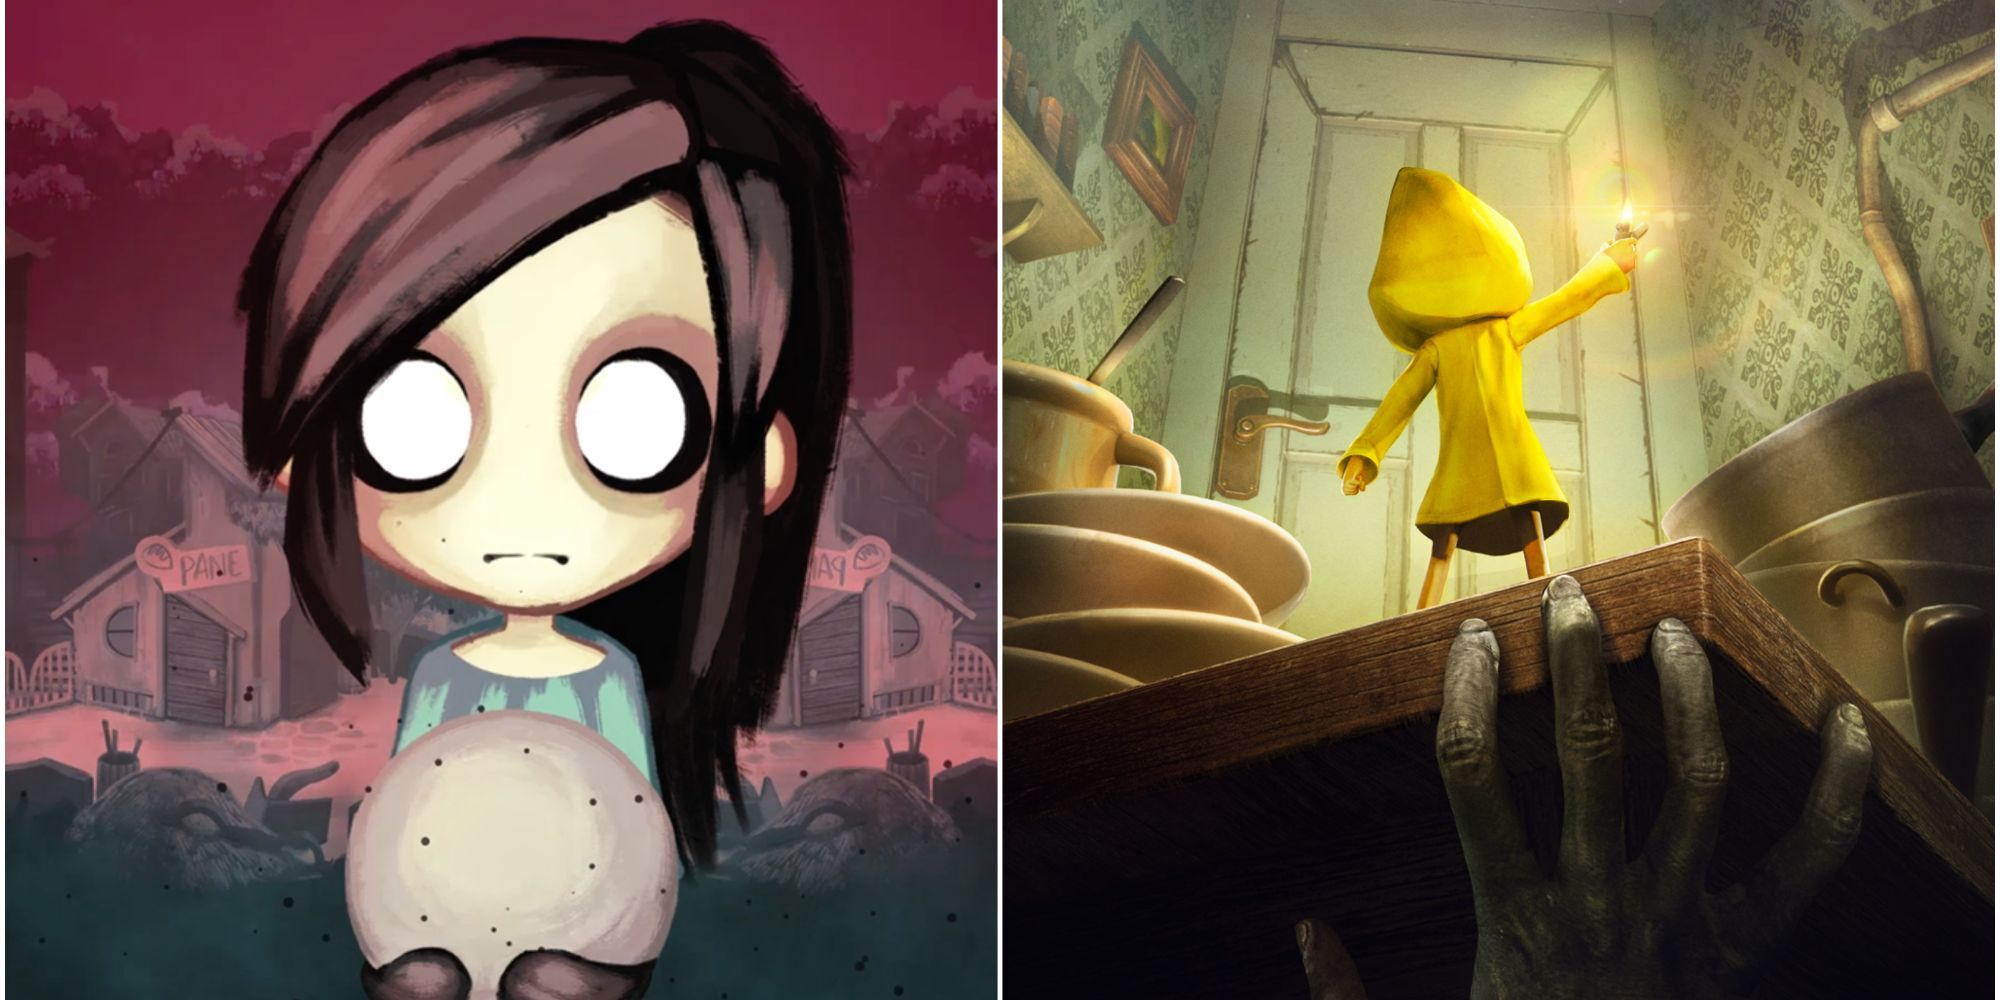 X Games Where You Play As A Child: Lucy from Children of Silentown holding an orb, beside Six from Little Nightmares in a yellow raincoat holding a light as a creepy hand reaches for her